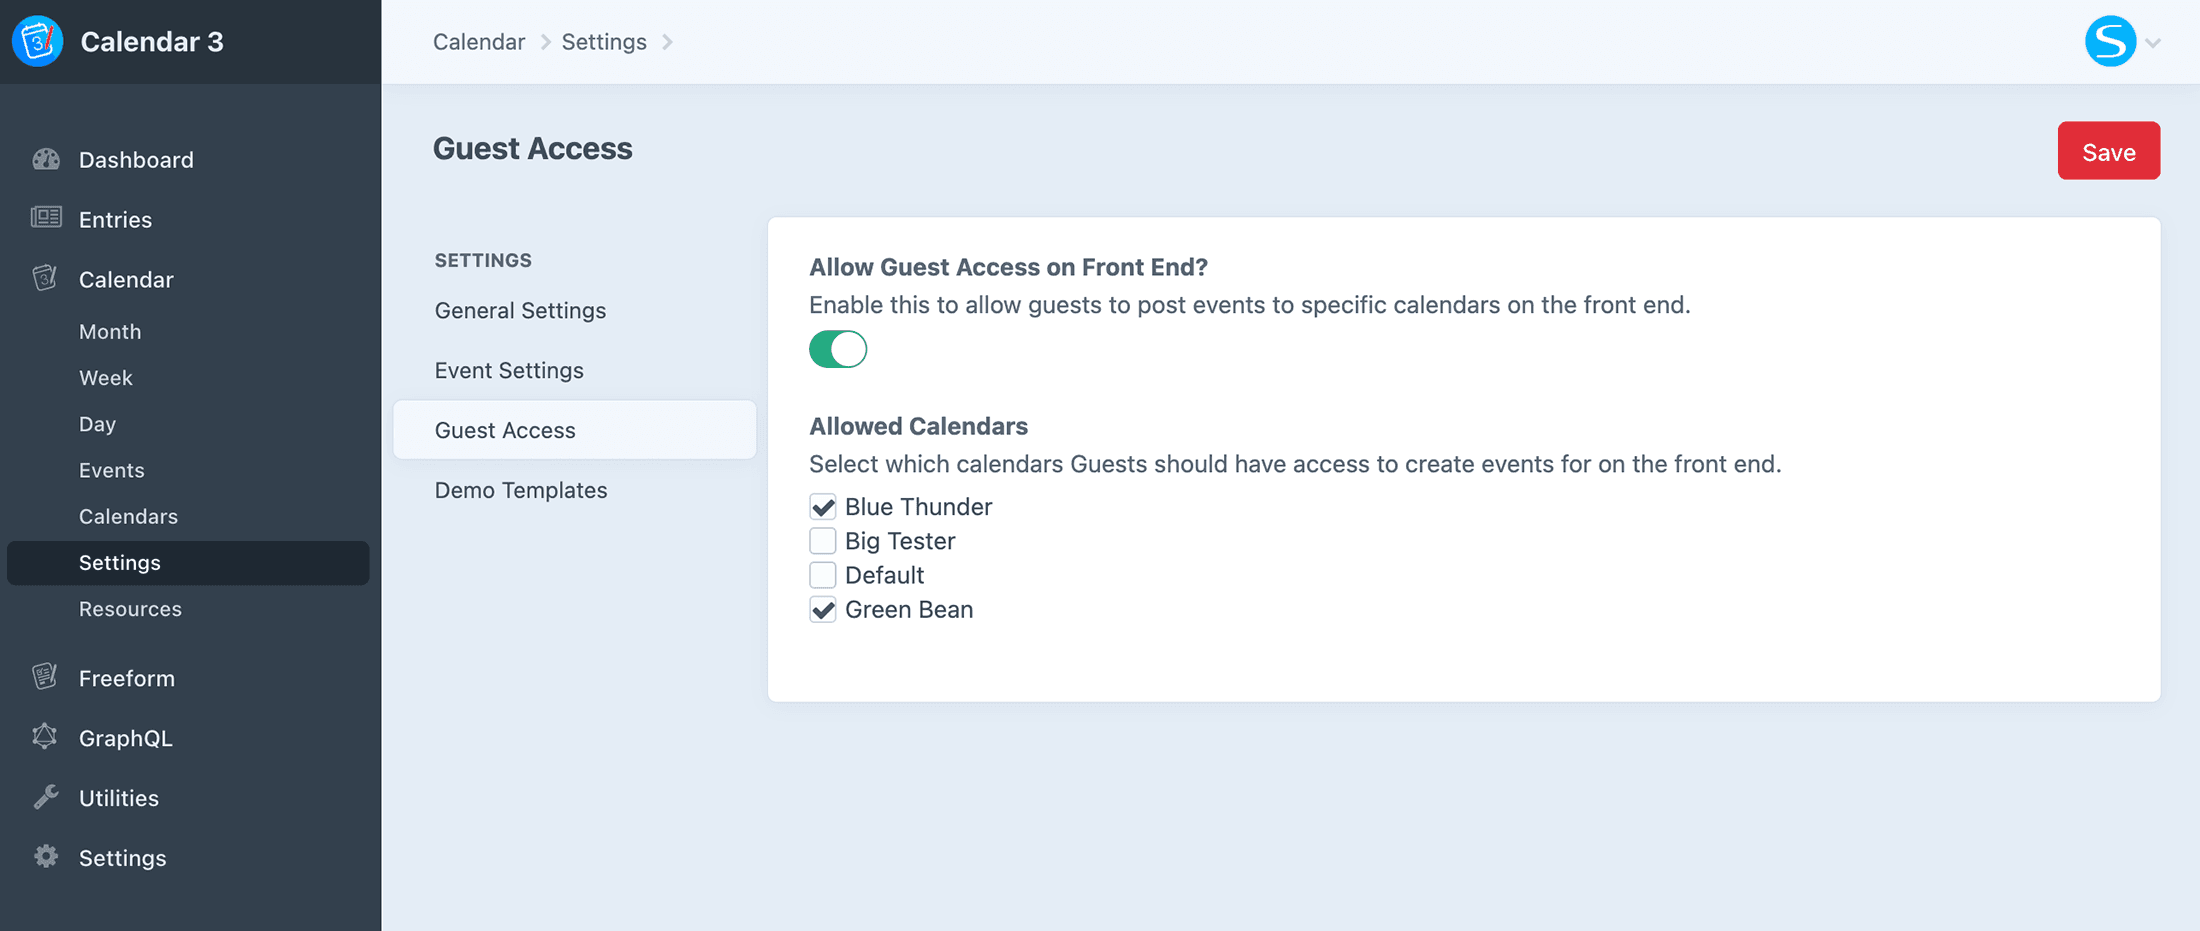 Guest Access Settings